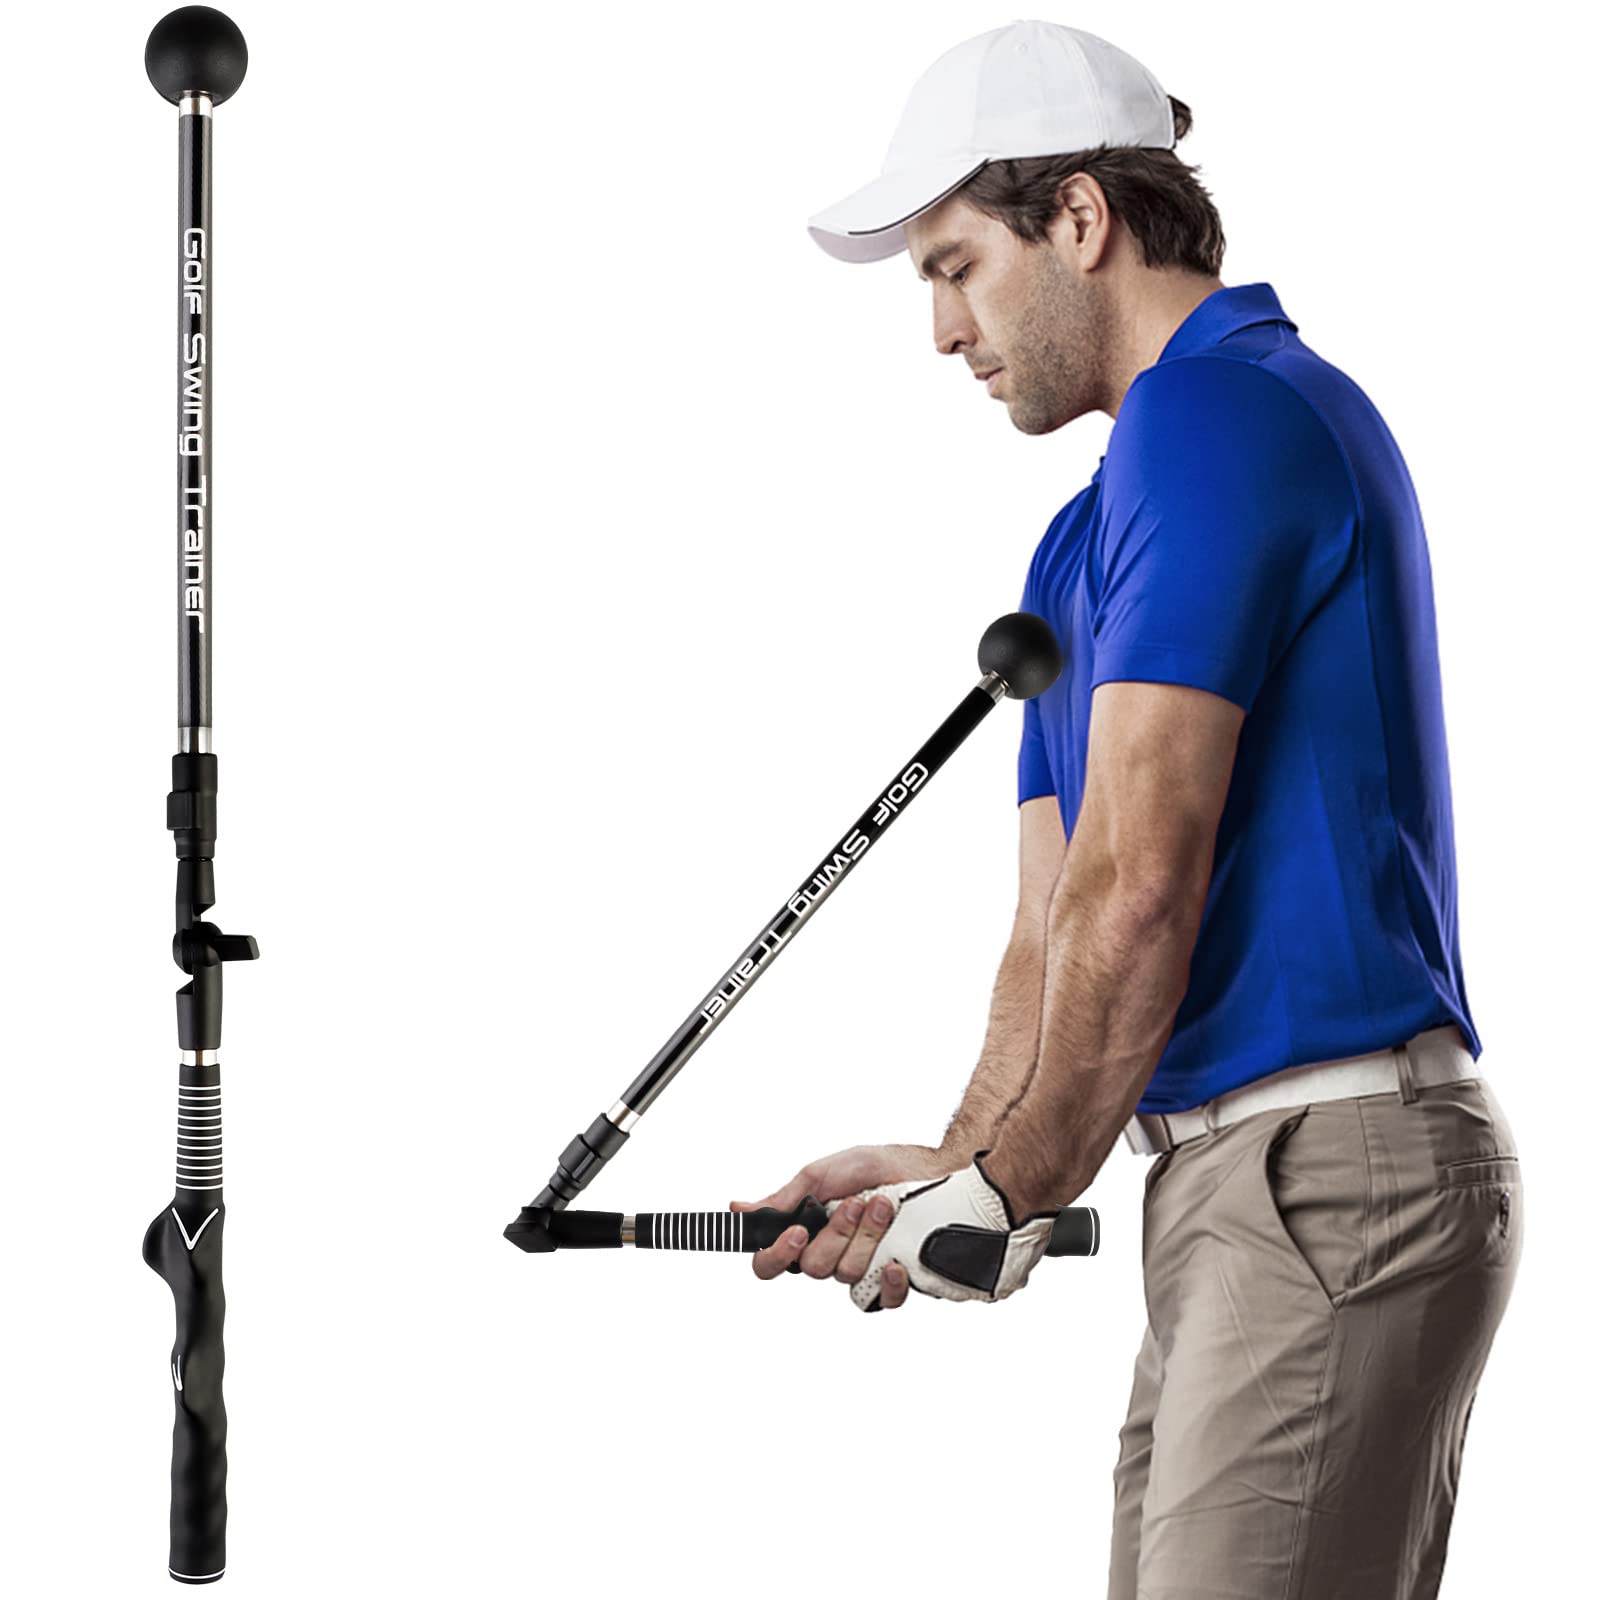 TAOTOP Golf Swing Trainer, Portable Golf Training Aid, Adjustable Lightweight, Durable Golf Trainer with Ergonomic Grip for Beginners